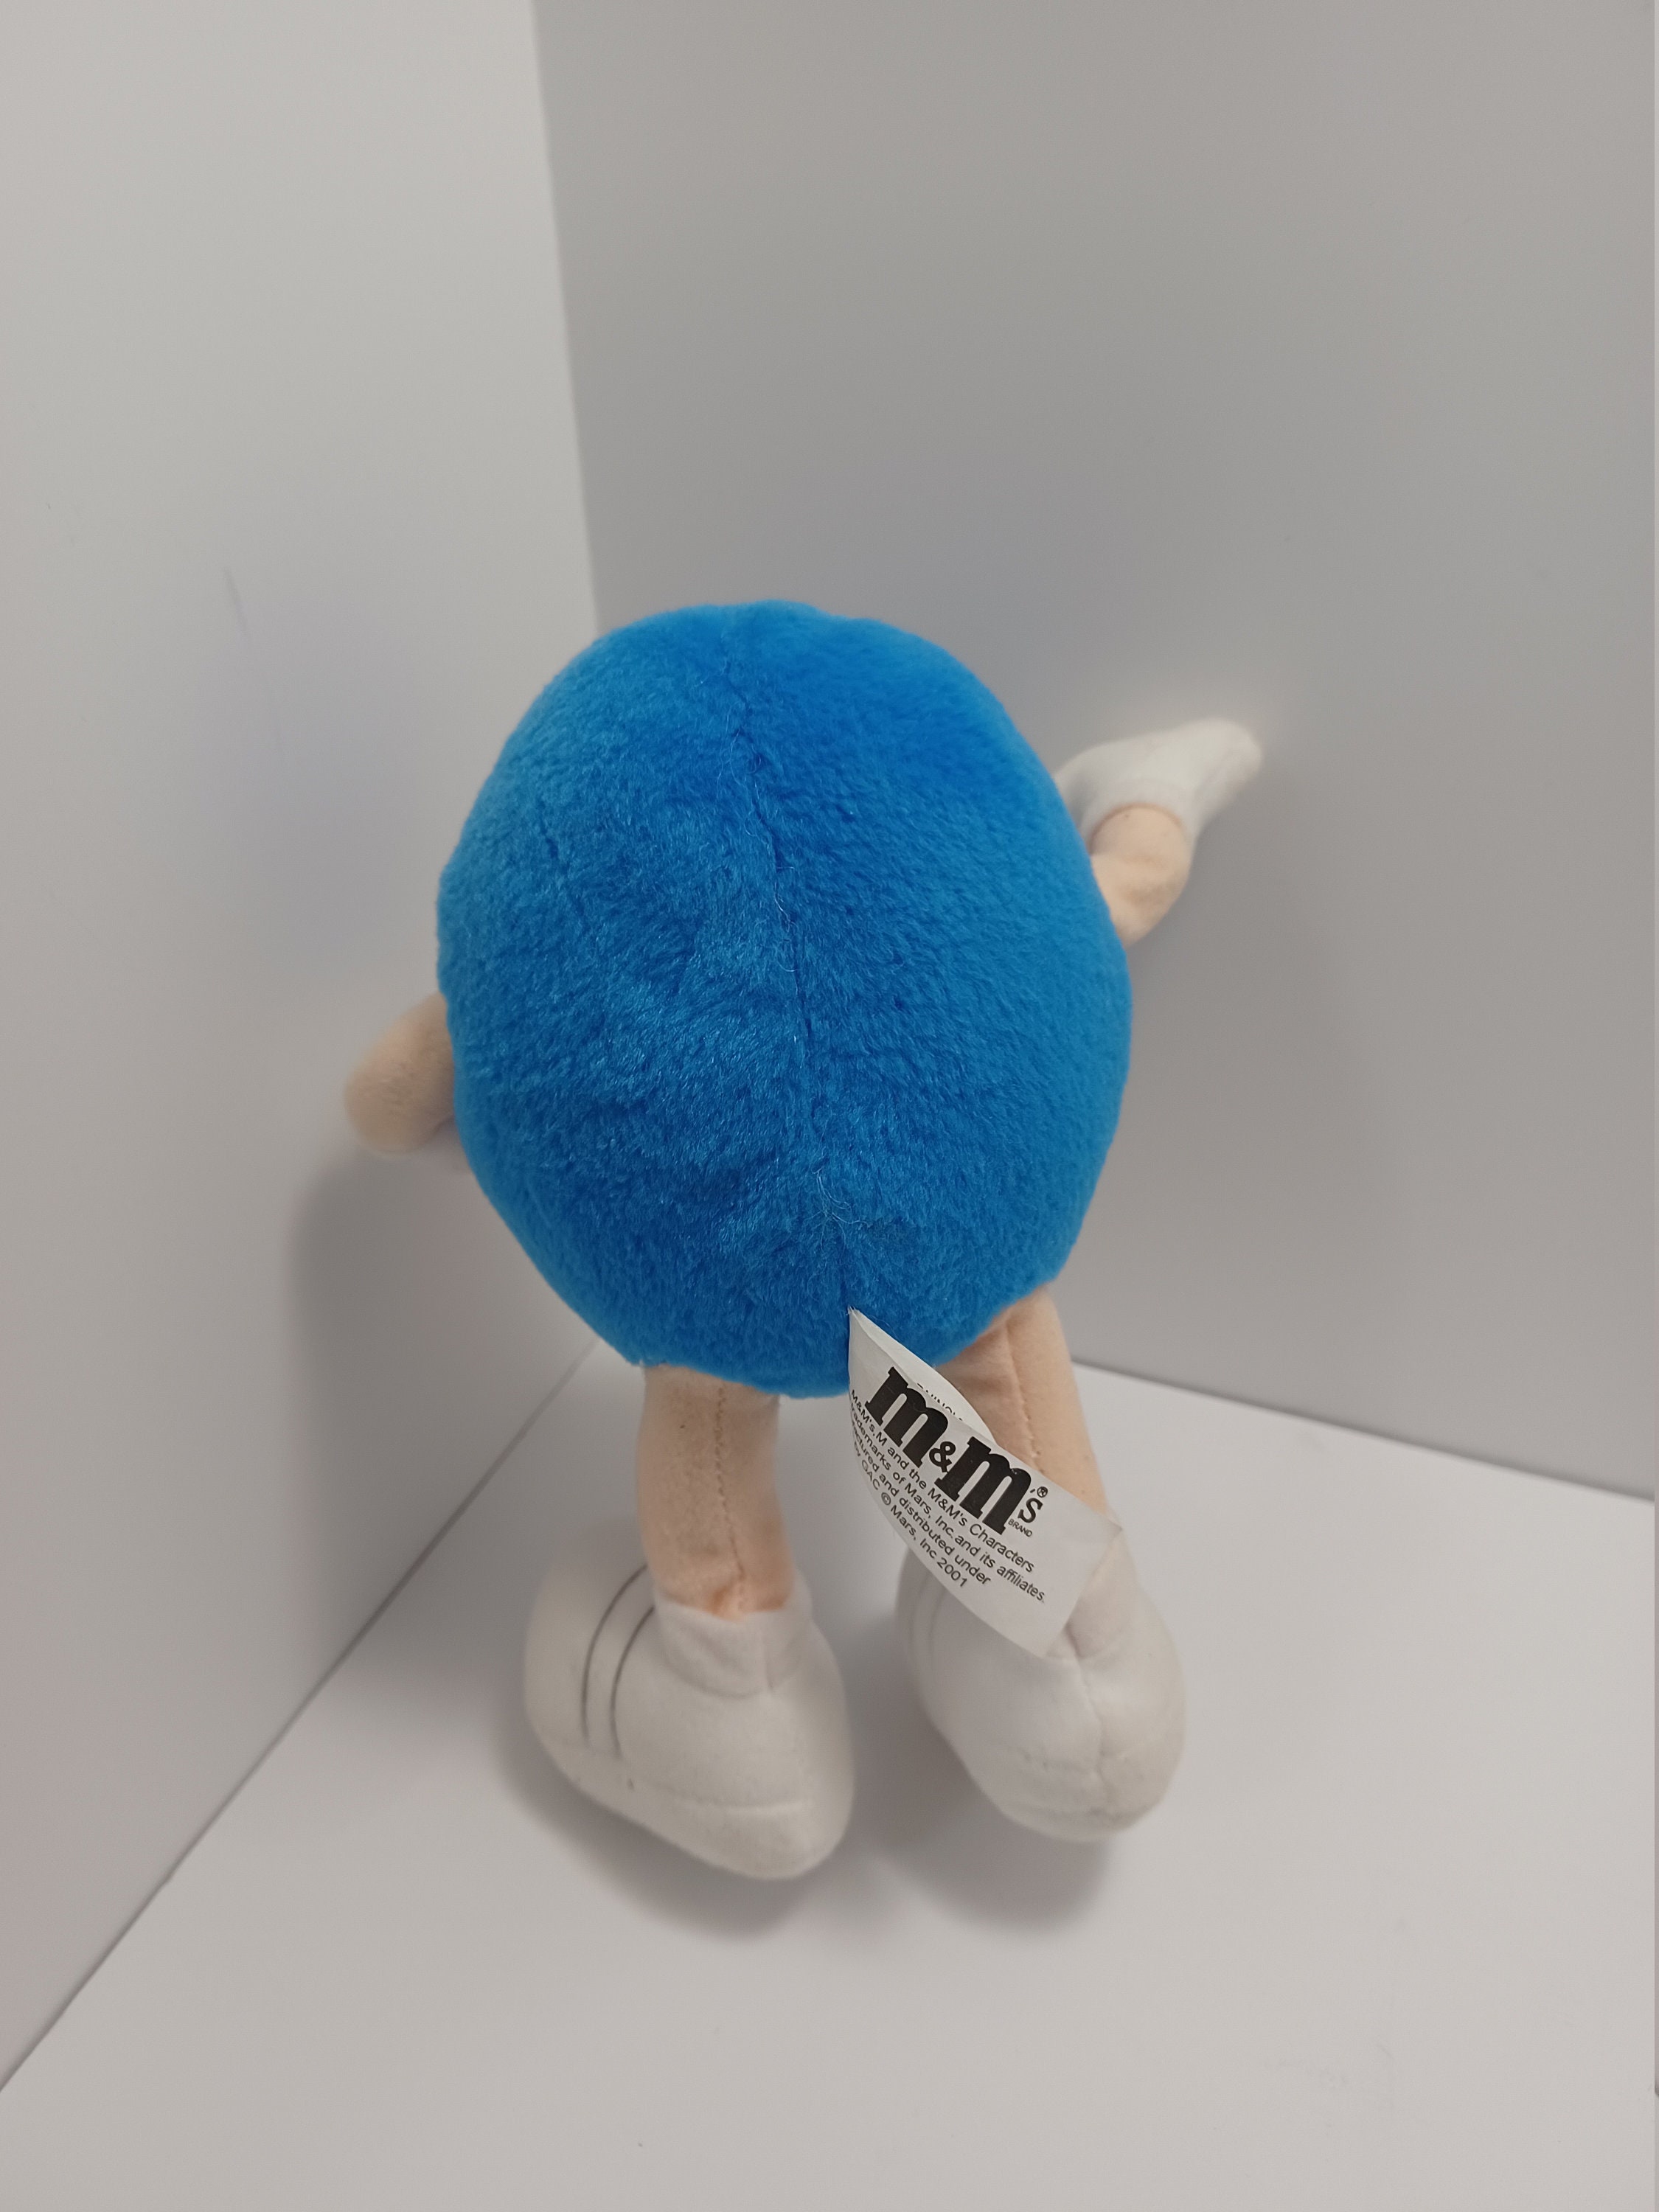 💙 M&M's 7” Blue M&M Talking Plush Collectible Characters